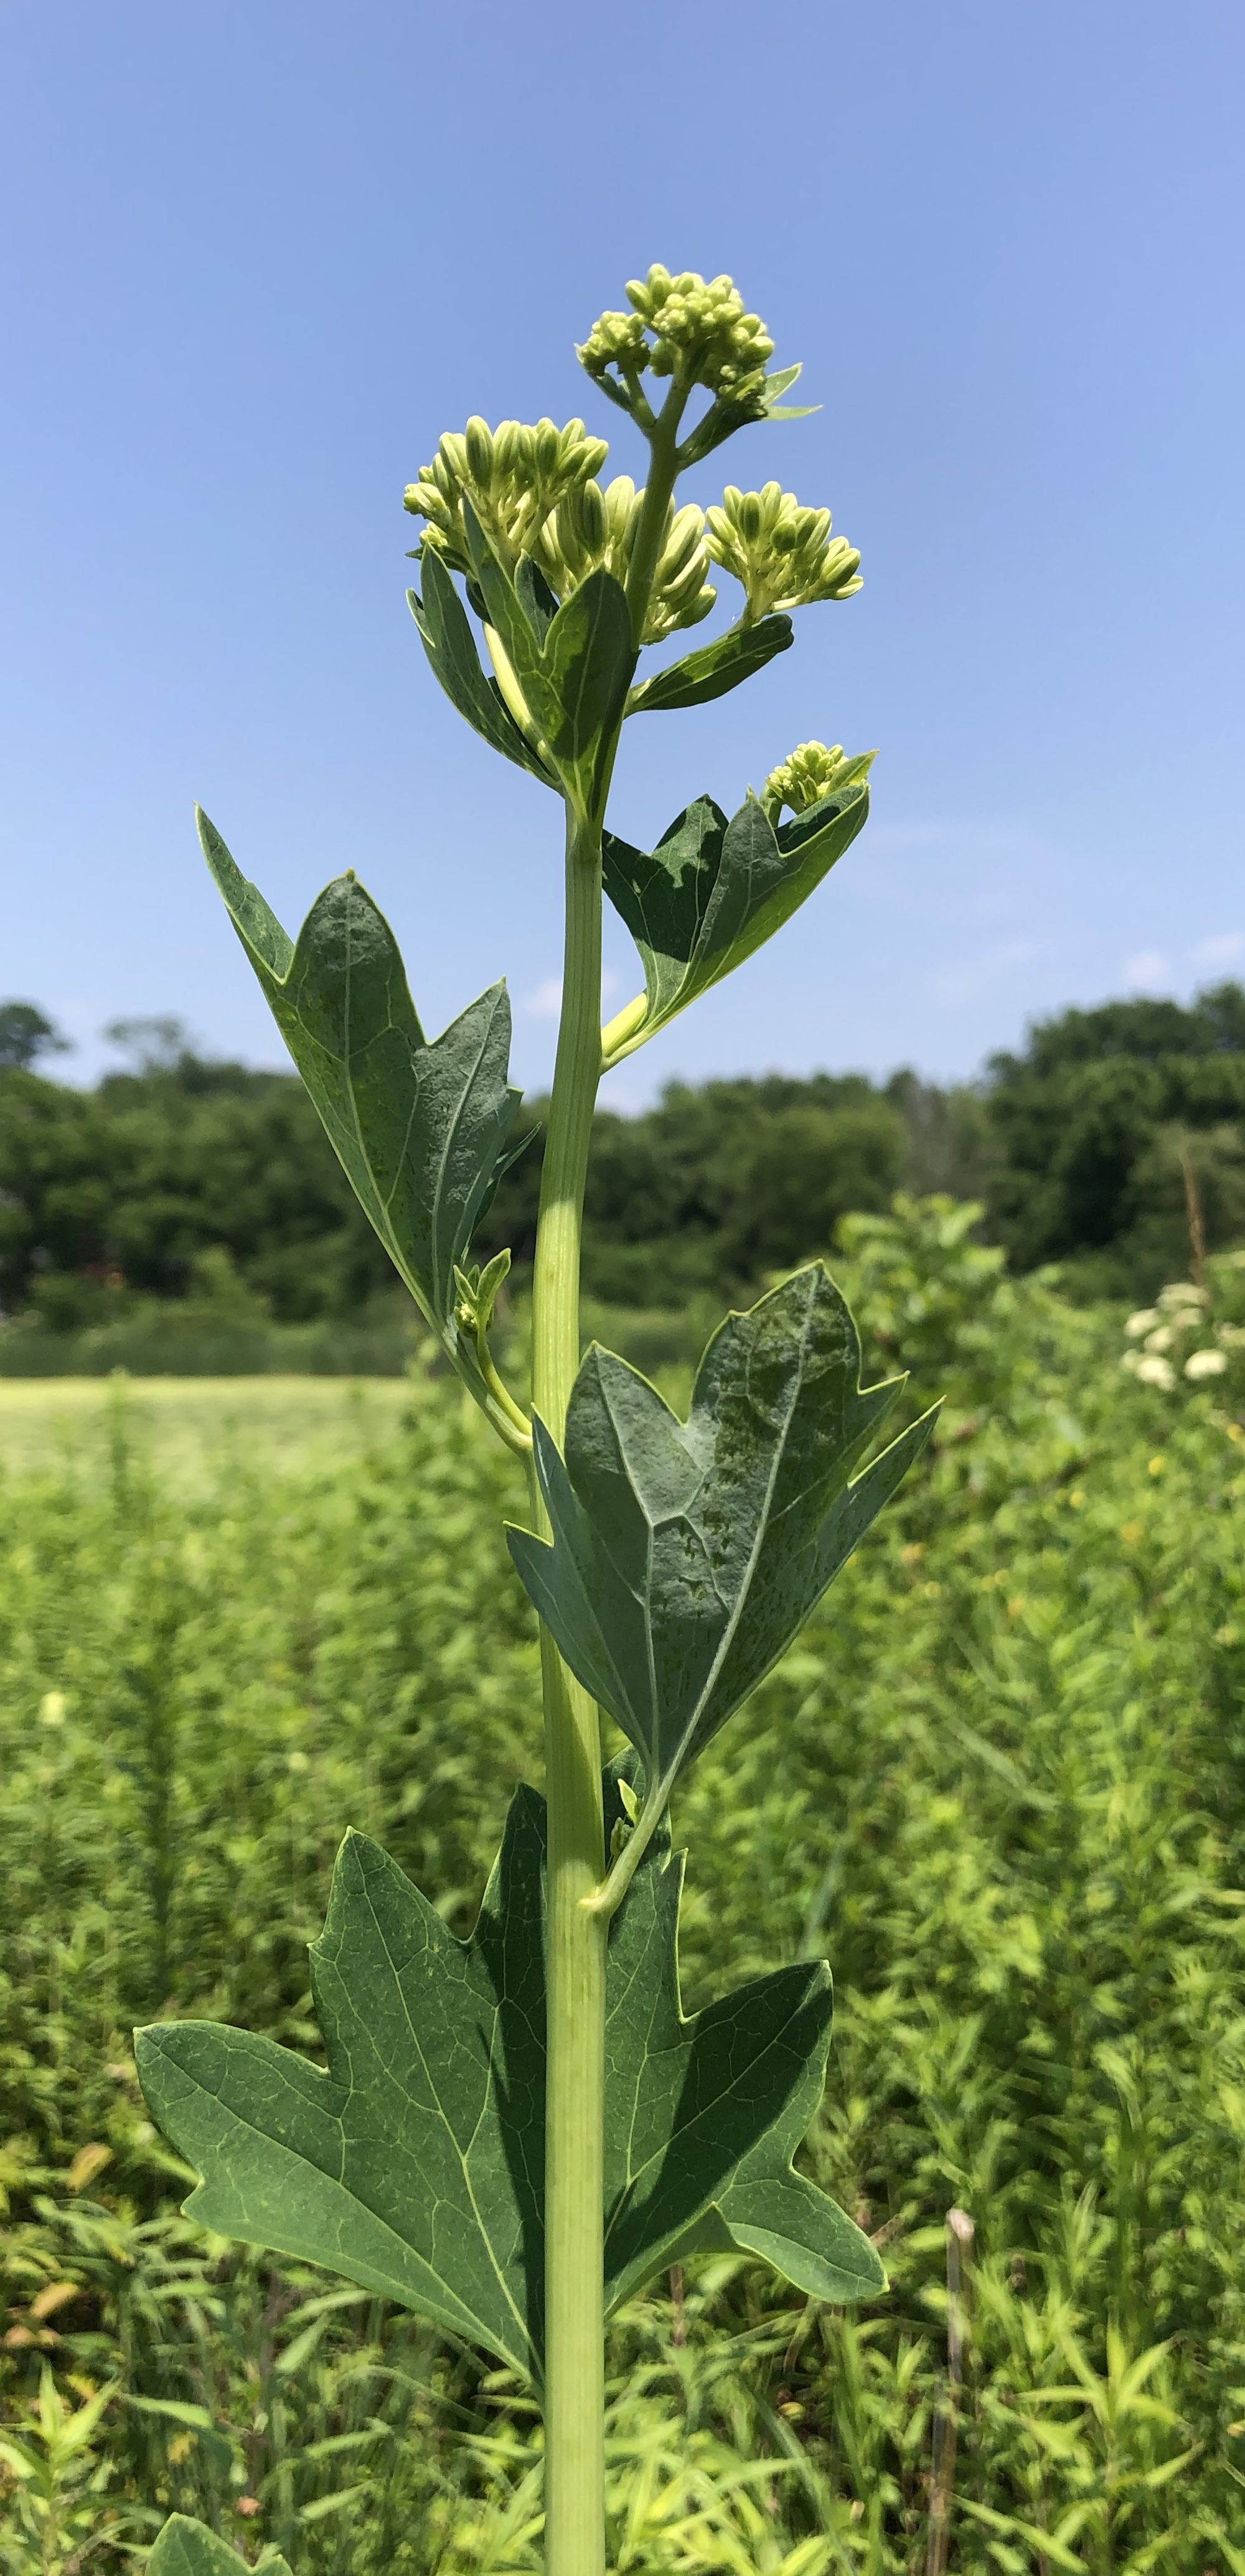 Pale Indian Plantain in Marion Dunn Prairie in Madison, Wisconsin on July 8, 2019.